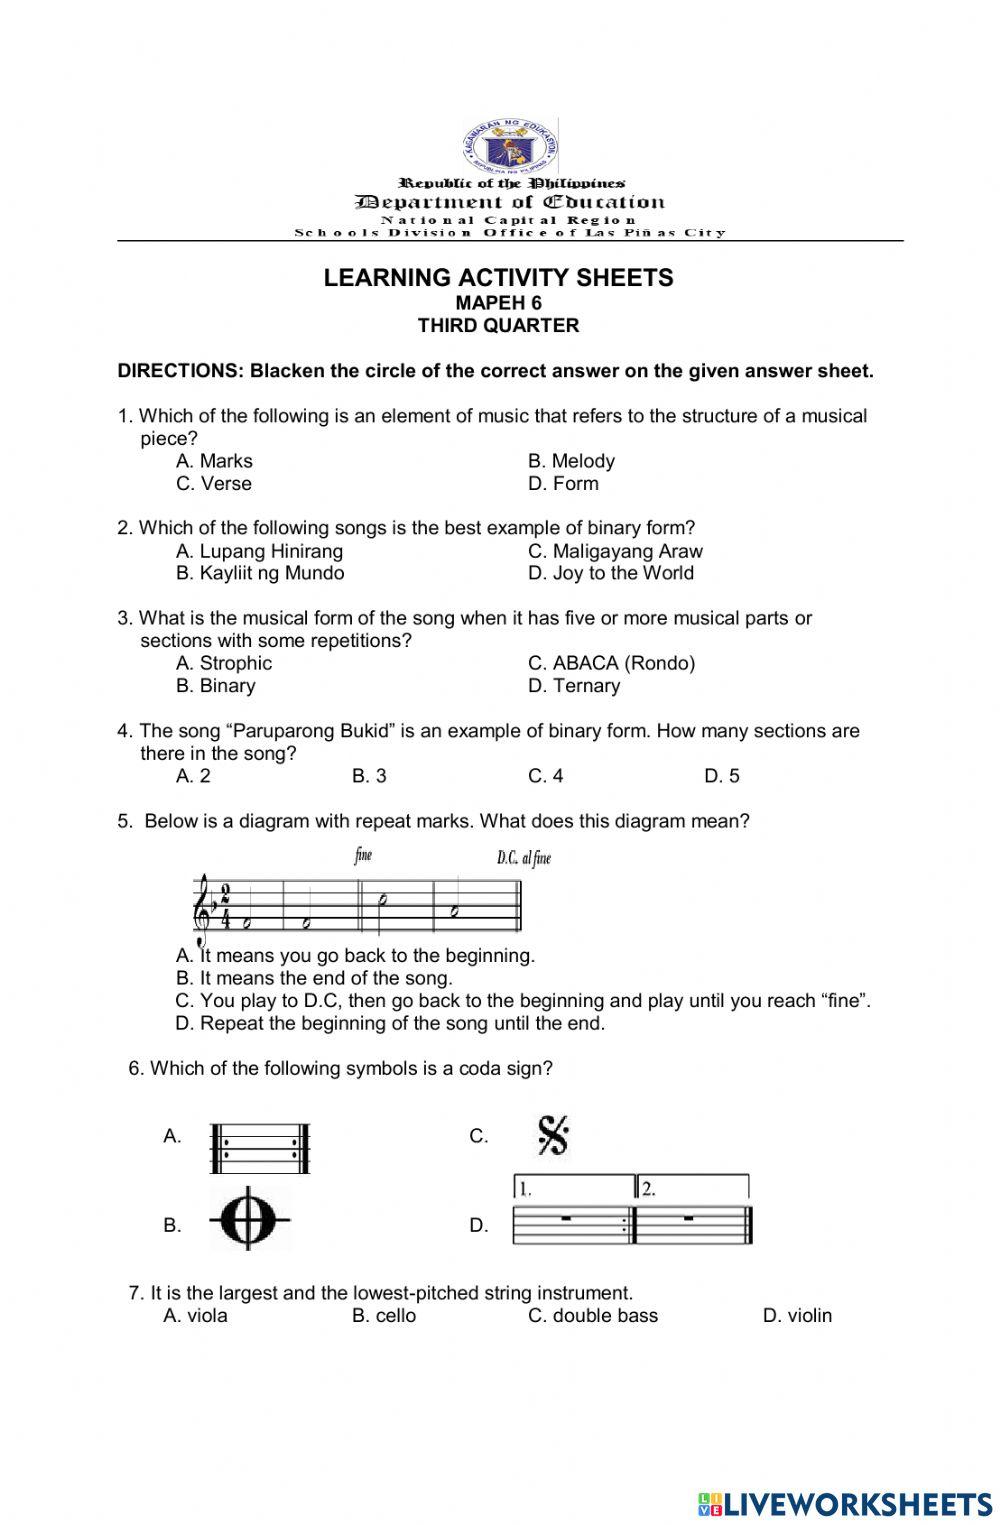 3rd Quarter LEARNING ACTIVITY SHEETS in MAPEH 6 FINAL